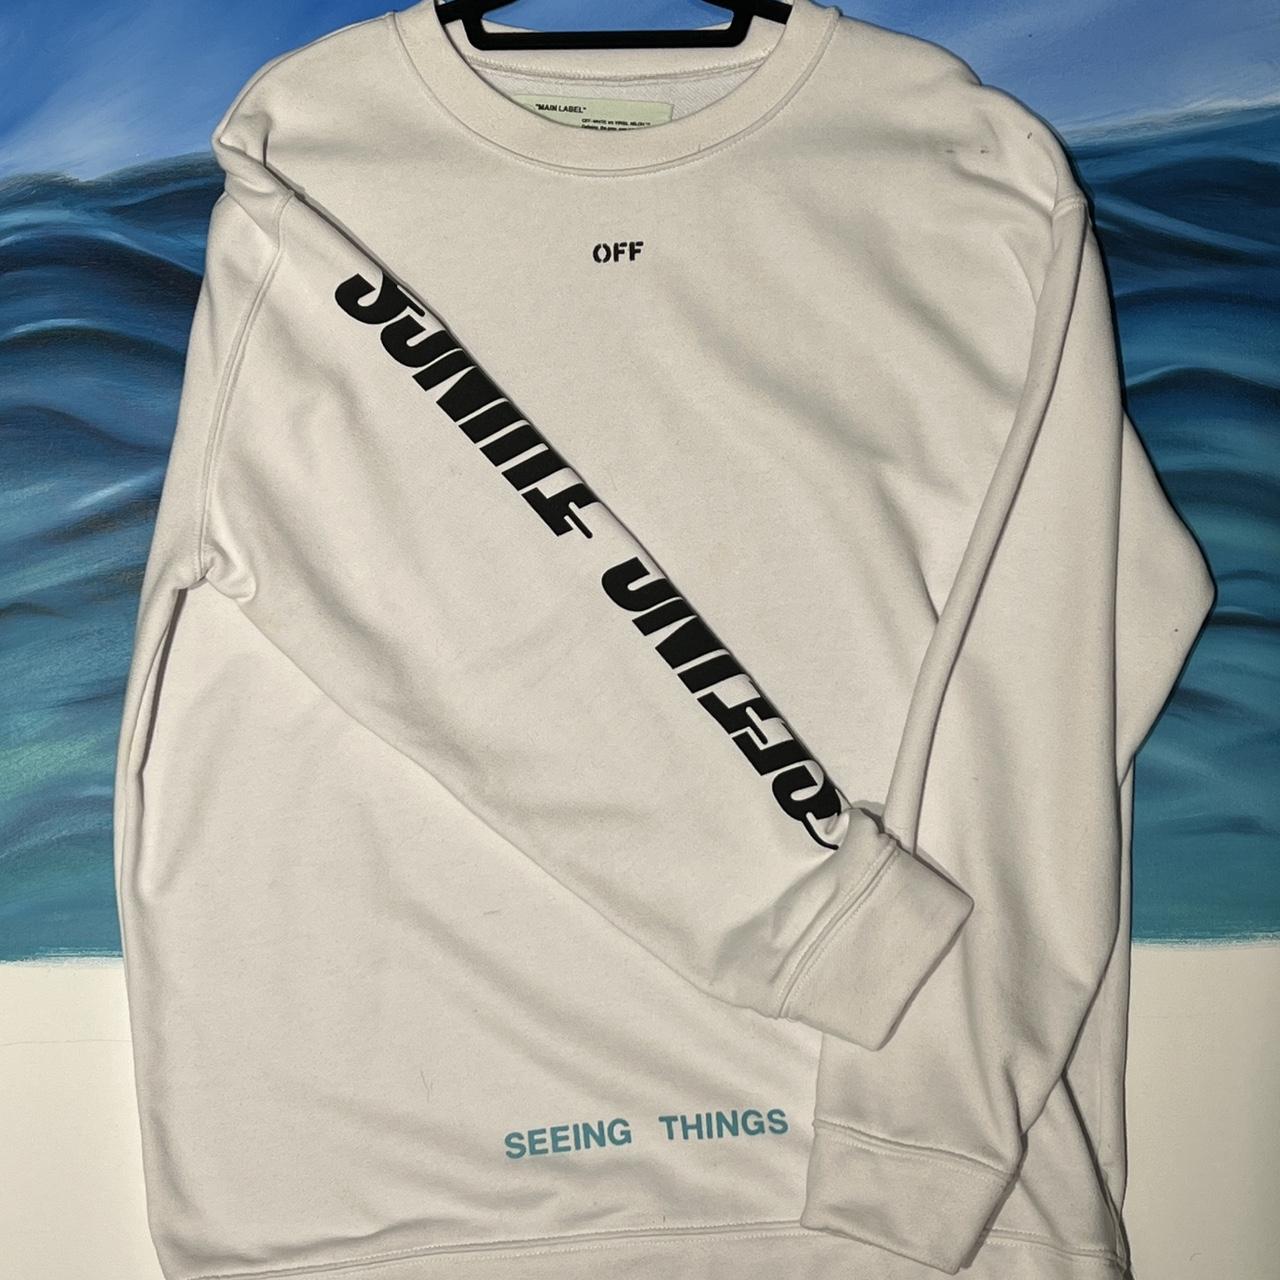 Off white seeing things sweater - 7-10 as no... Depop